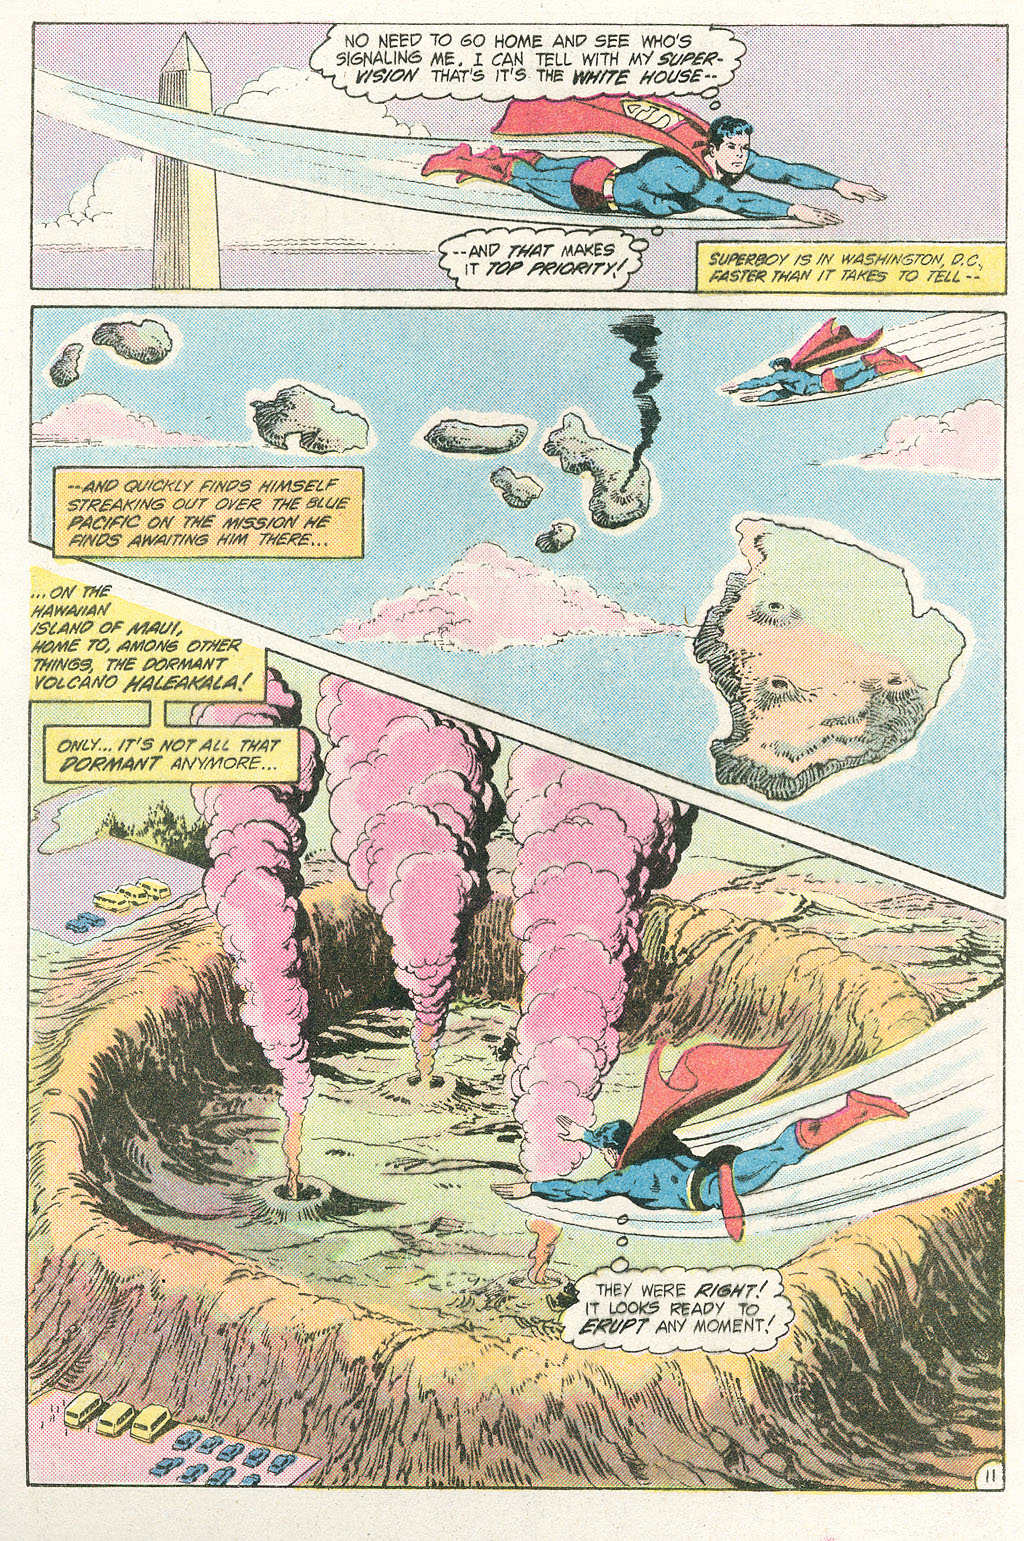 The New Adventures of Superboy 54 Page 15